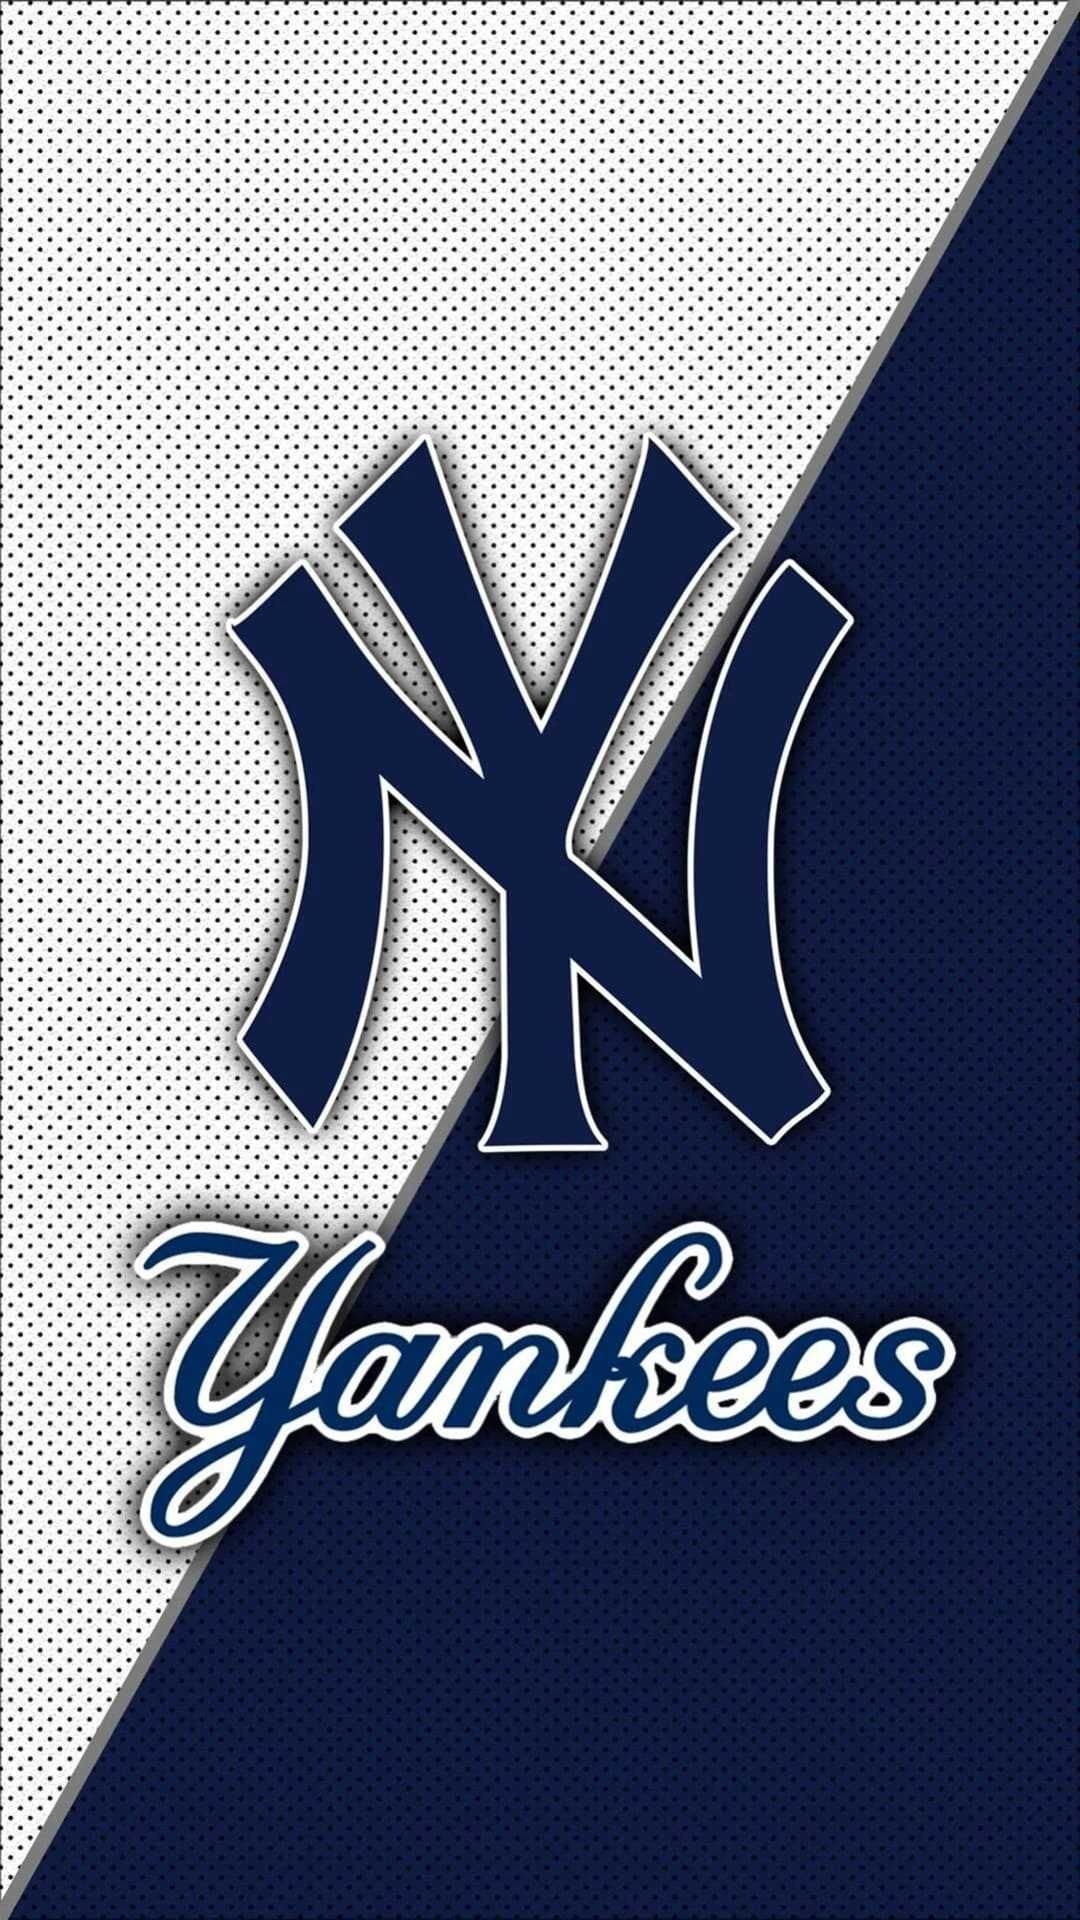 New York Yankees: The most successful professional sports team in the United States. 1080x1920 Full HD Wallpaper.